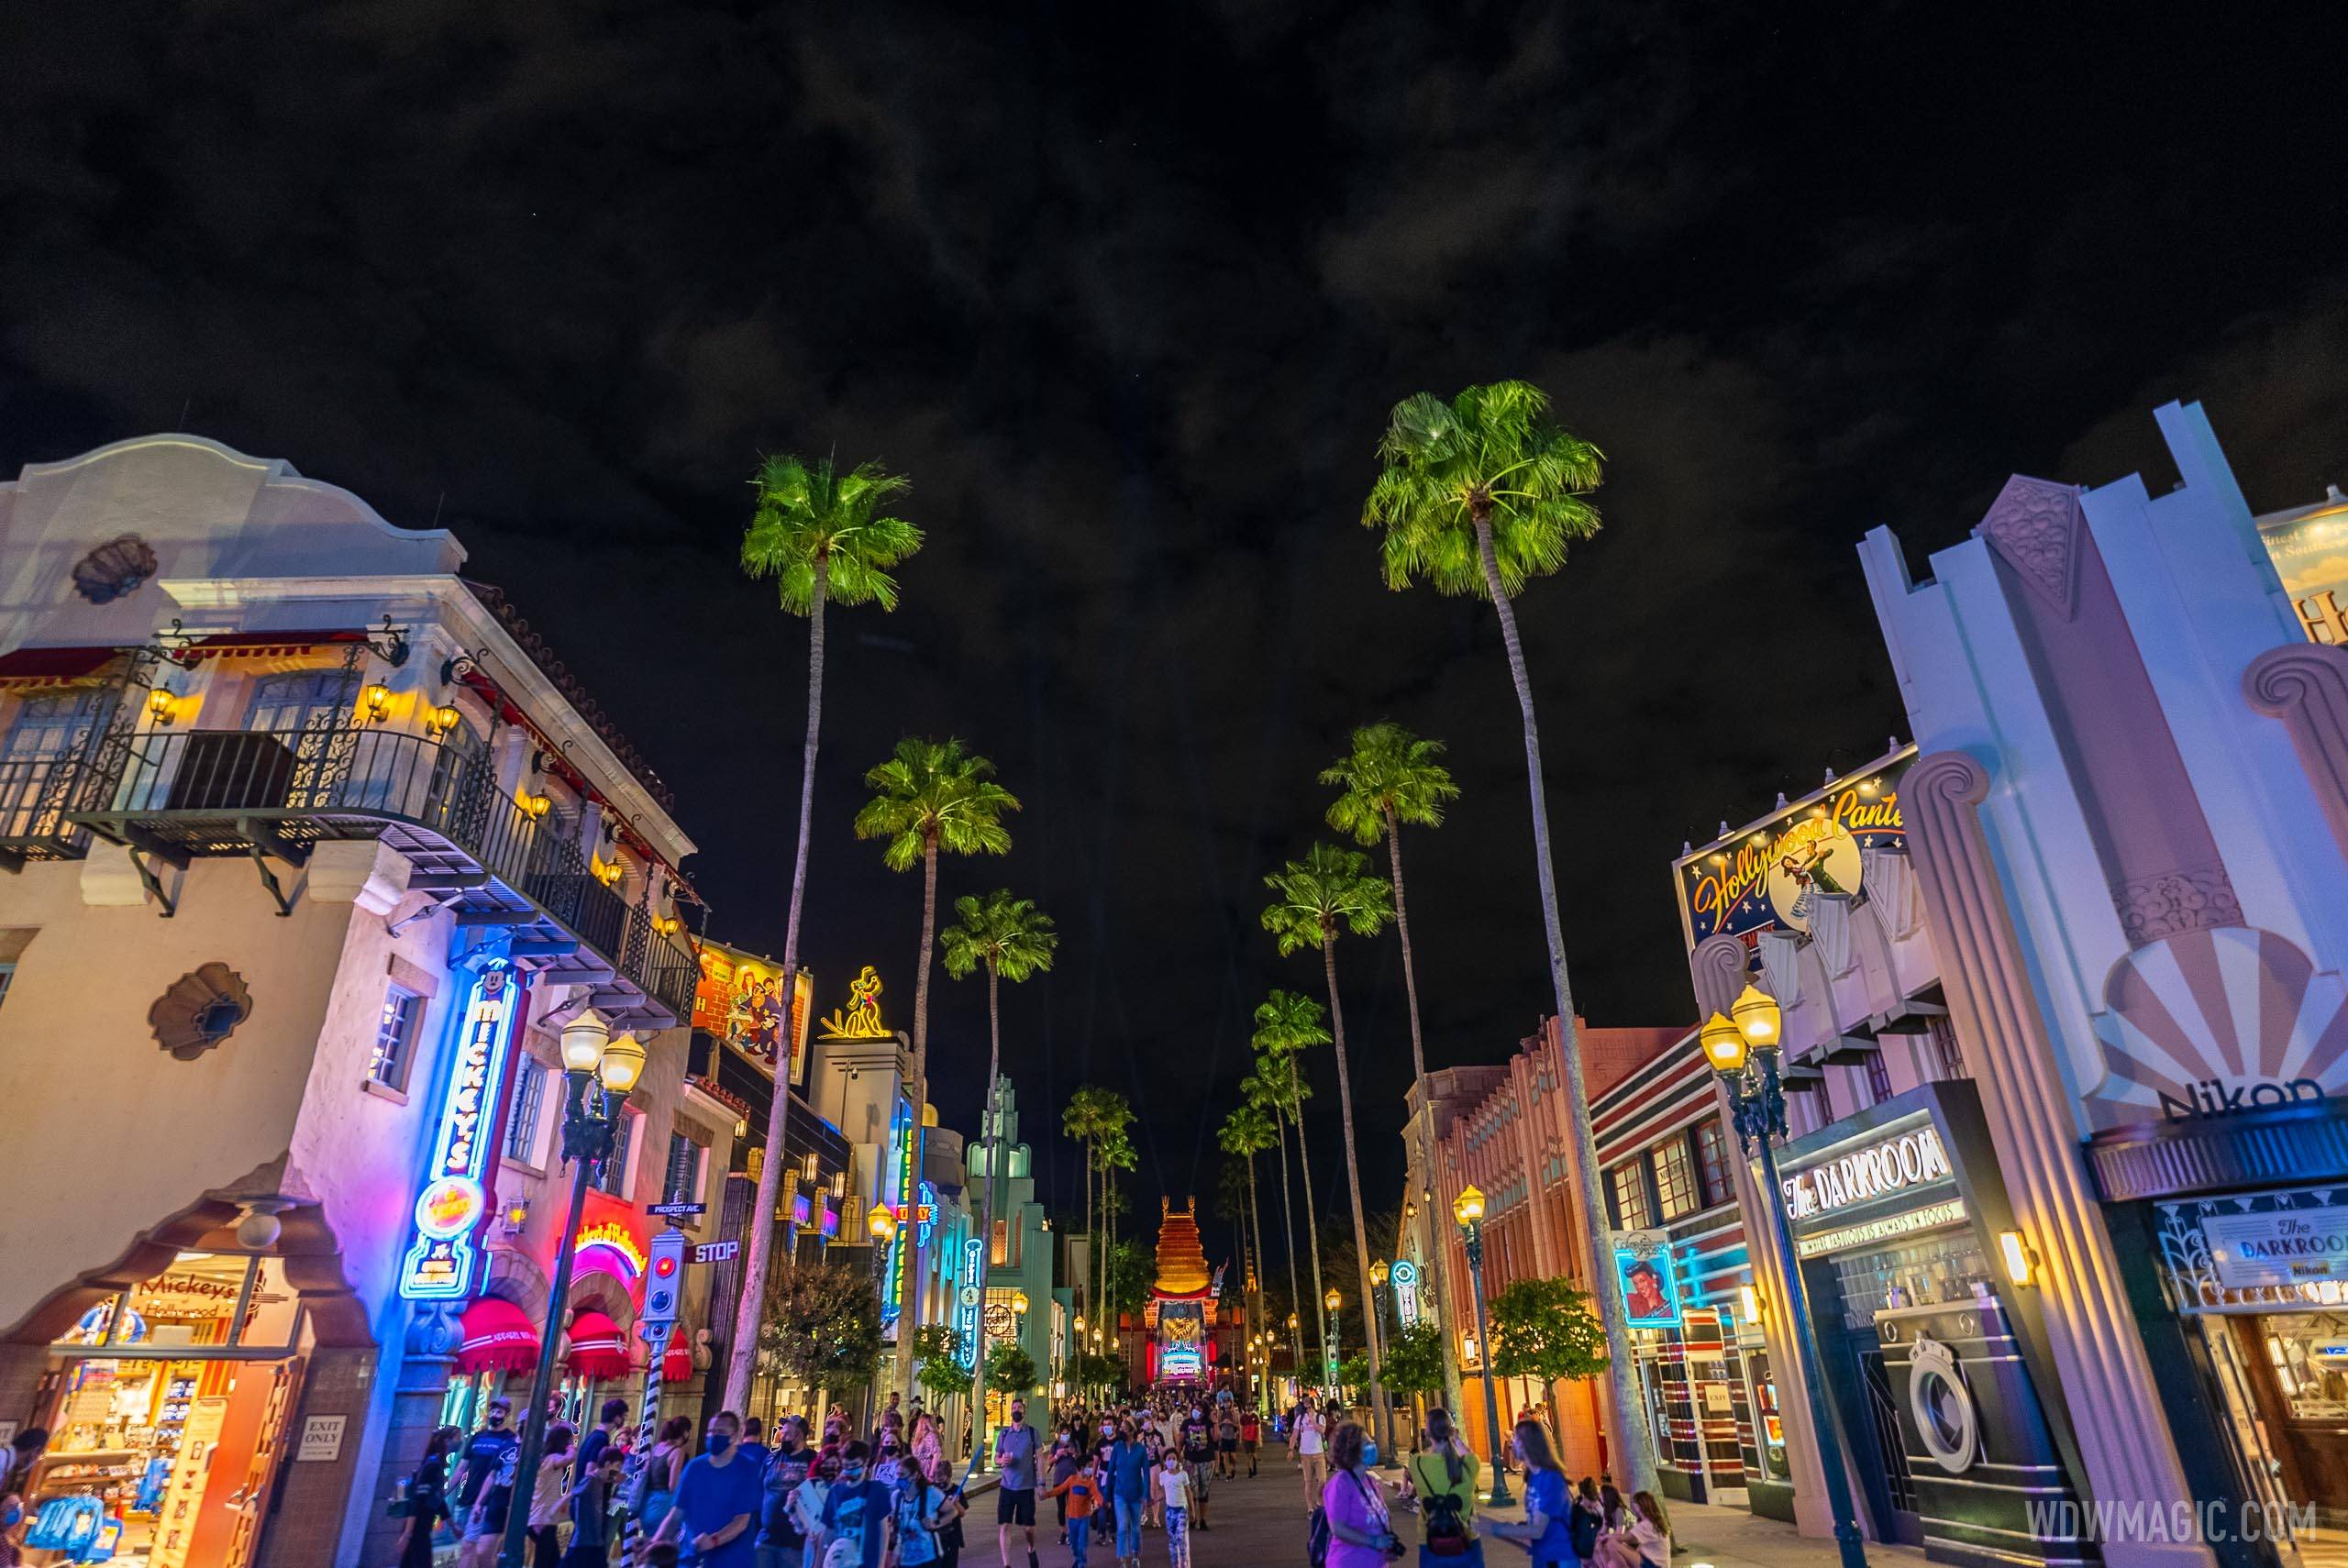 Disney's Hollywood Studios has provisional hours of 9am to 7pm in August